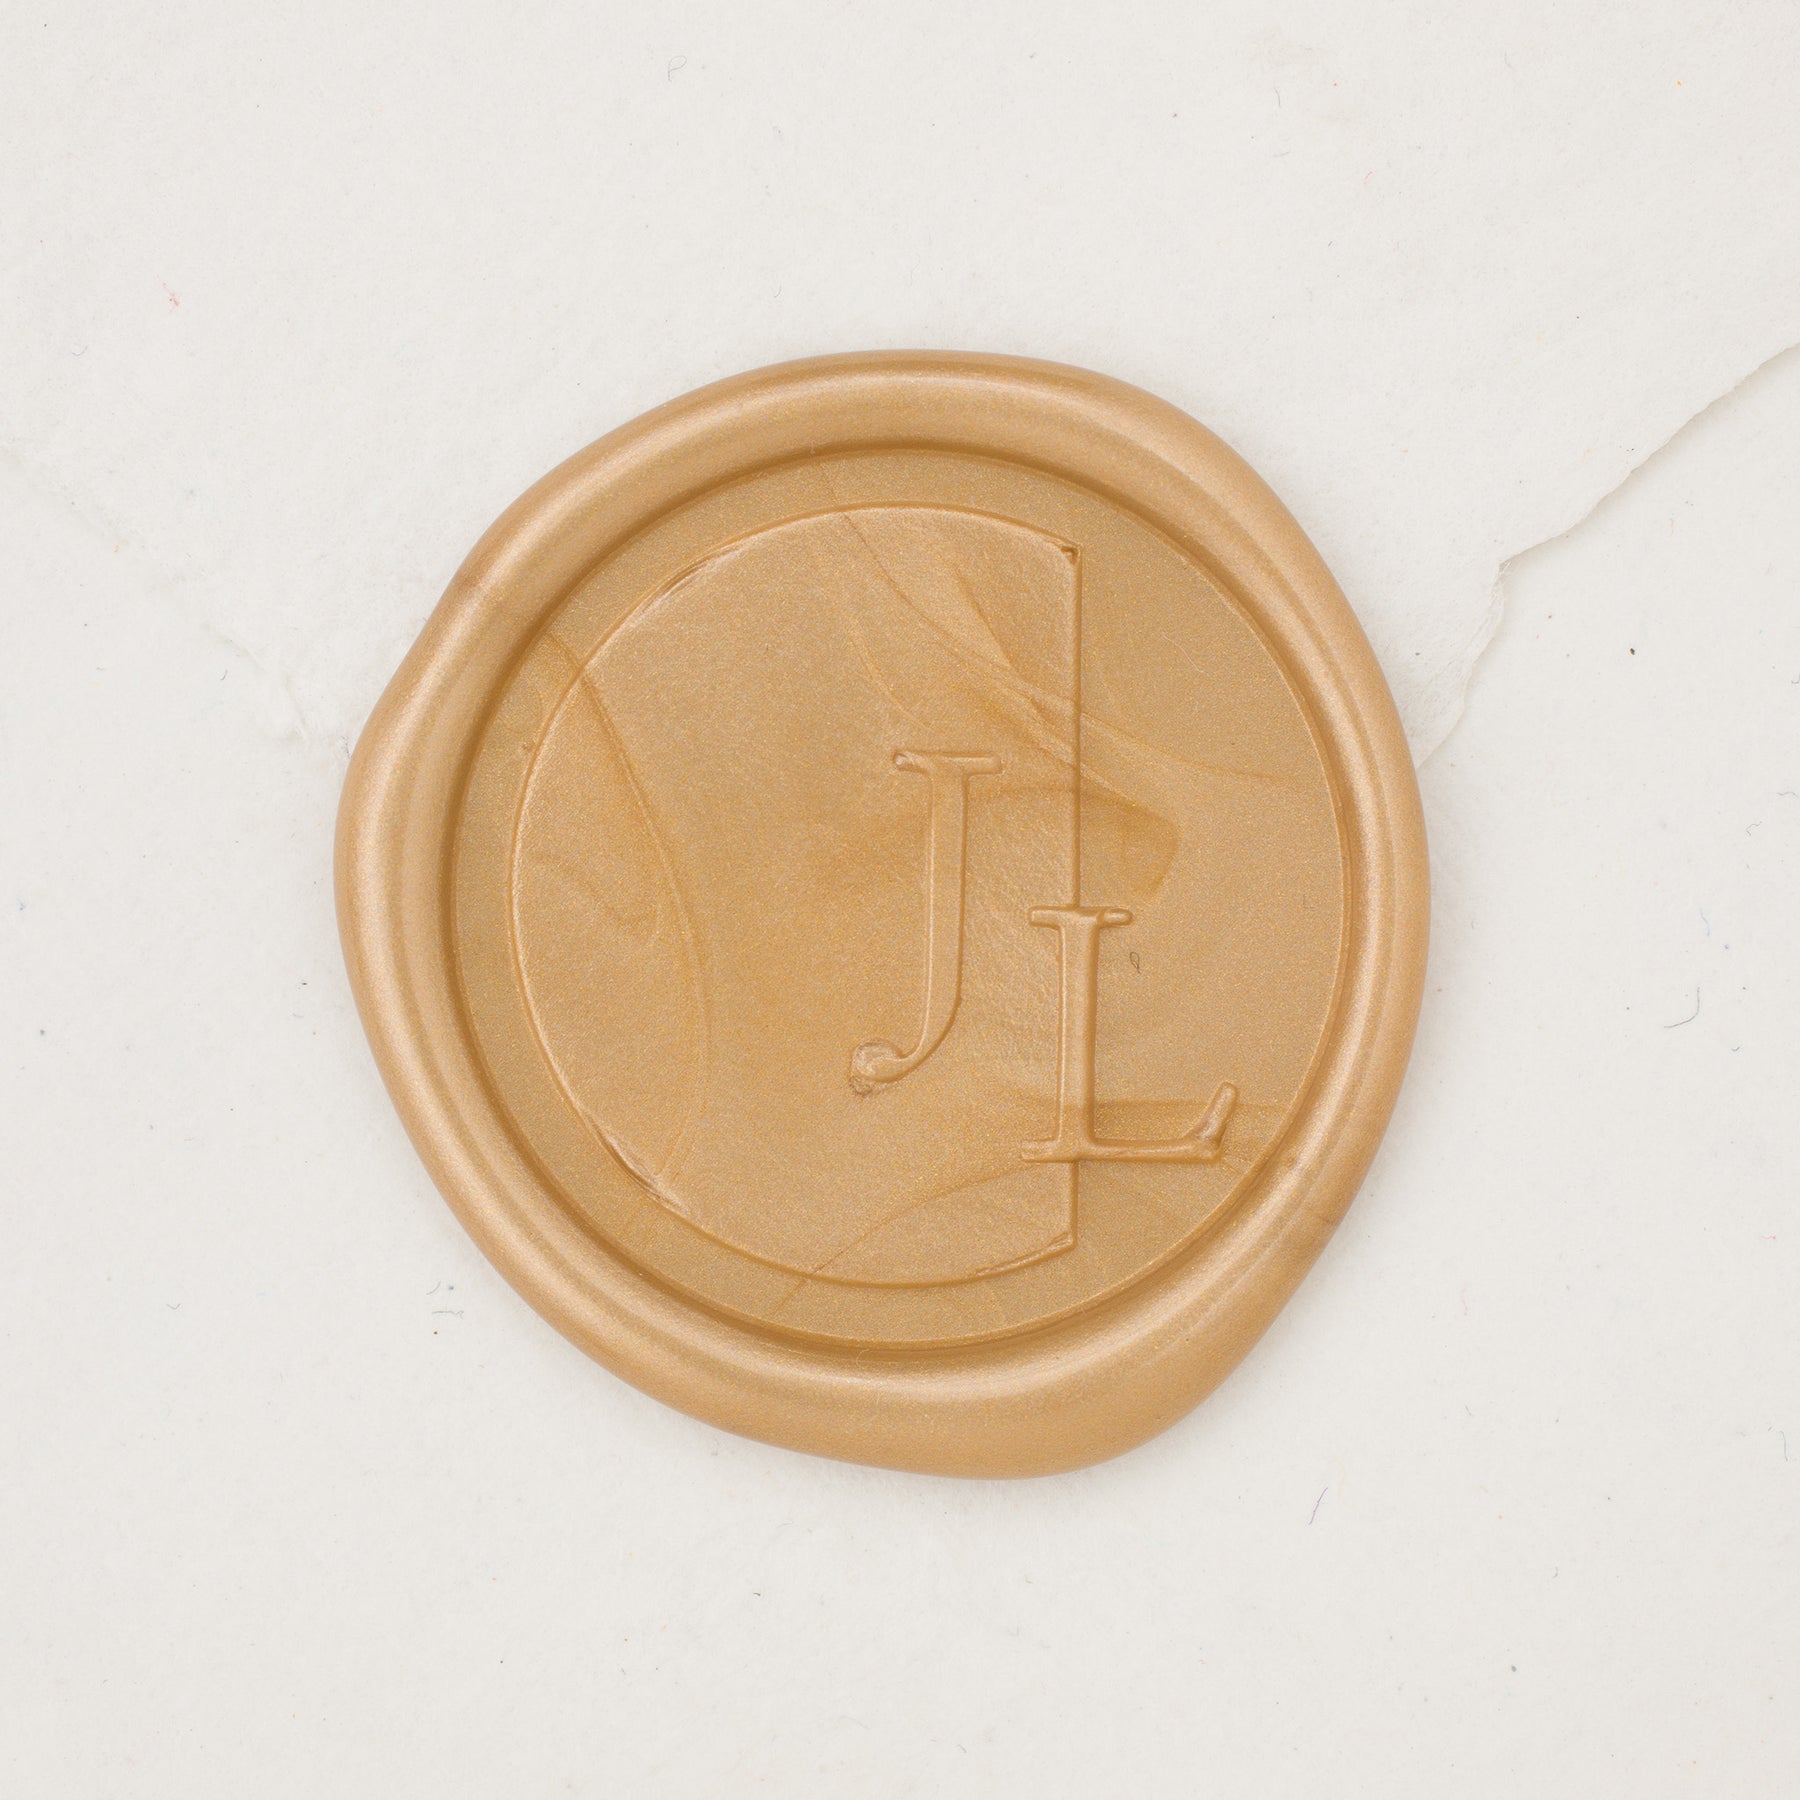 Calligraphy Monogram Wax Seal – Written Word Calligraphy and Design